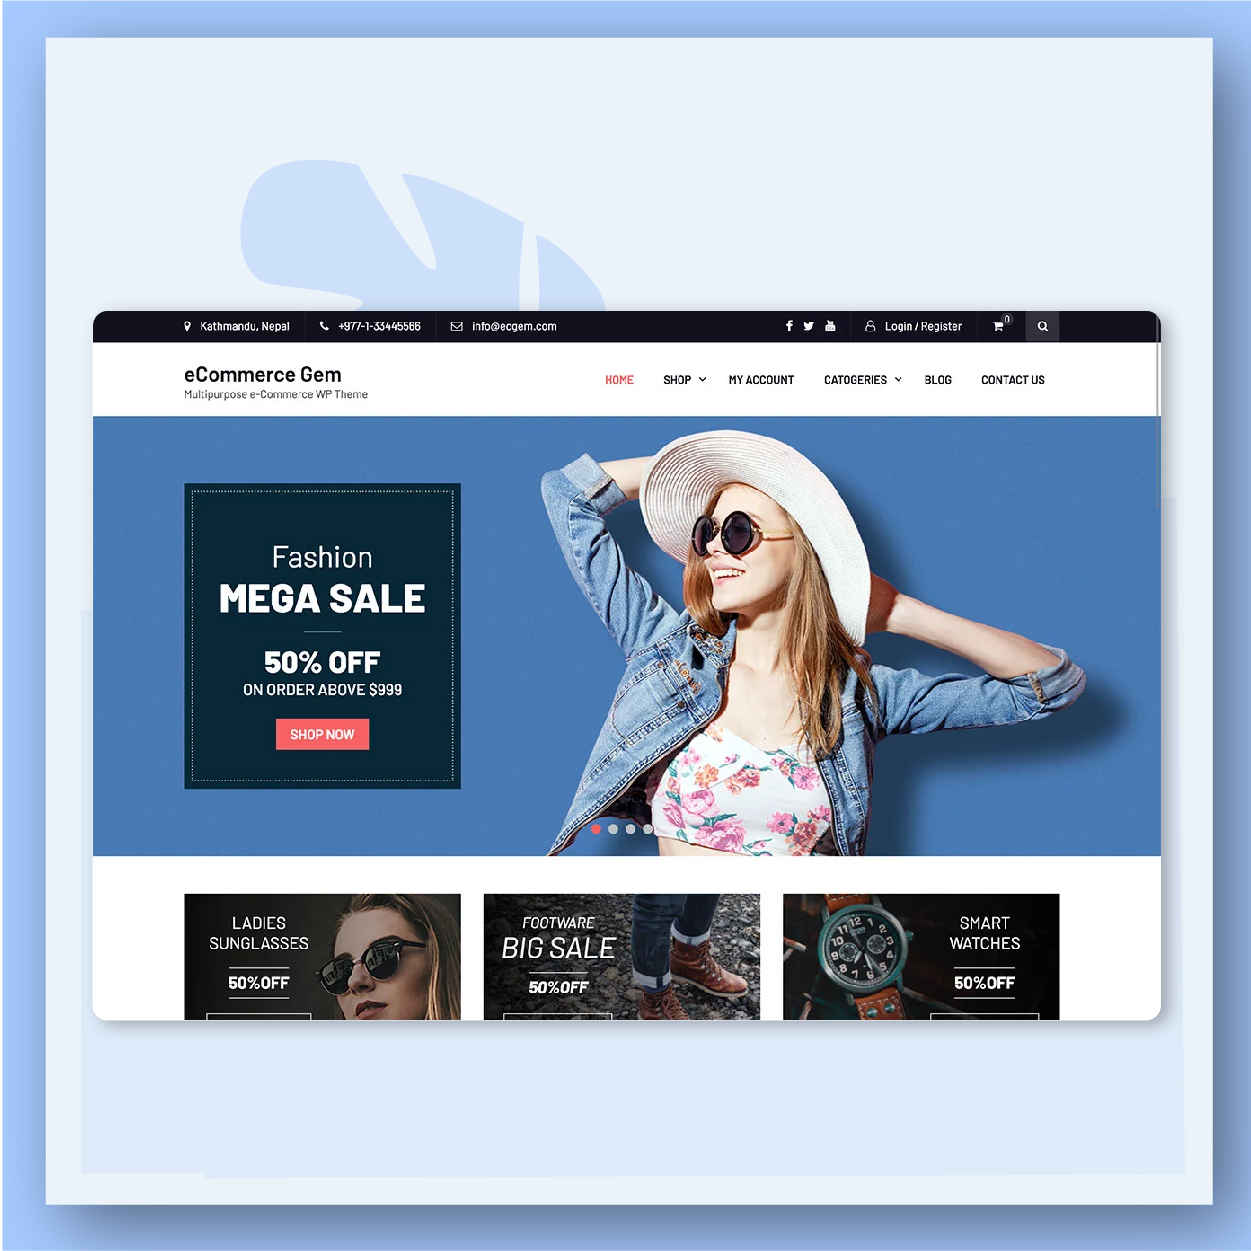 Offer are driving force for eCommerce website